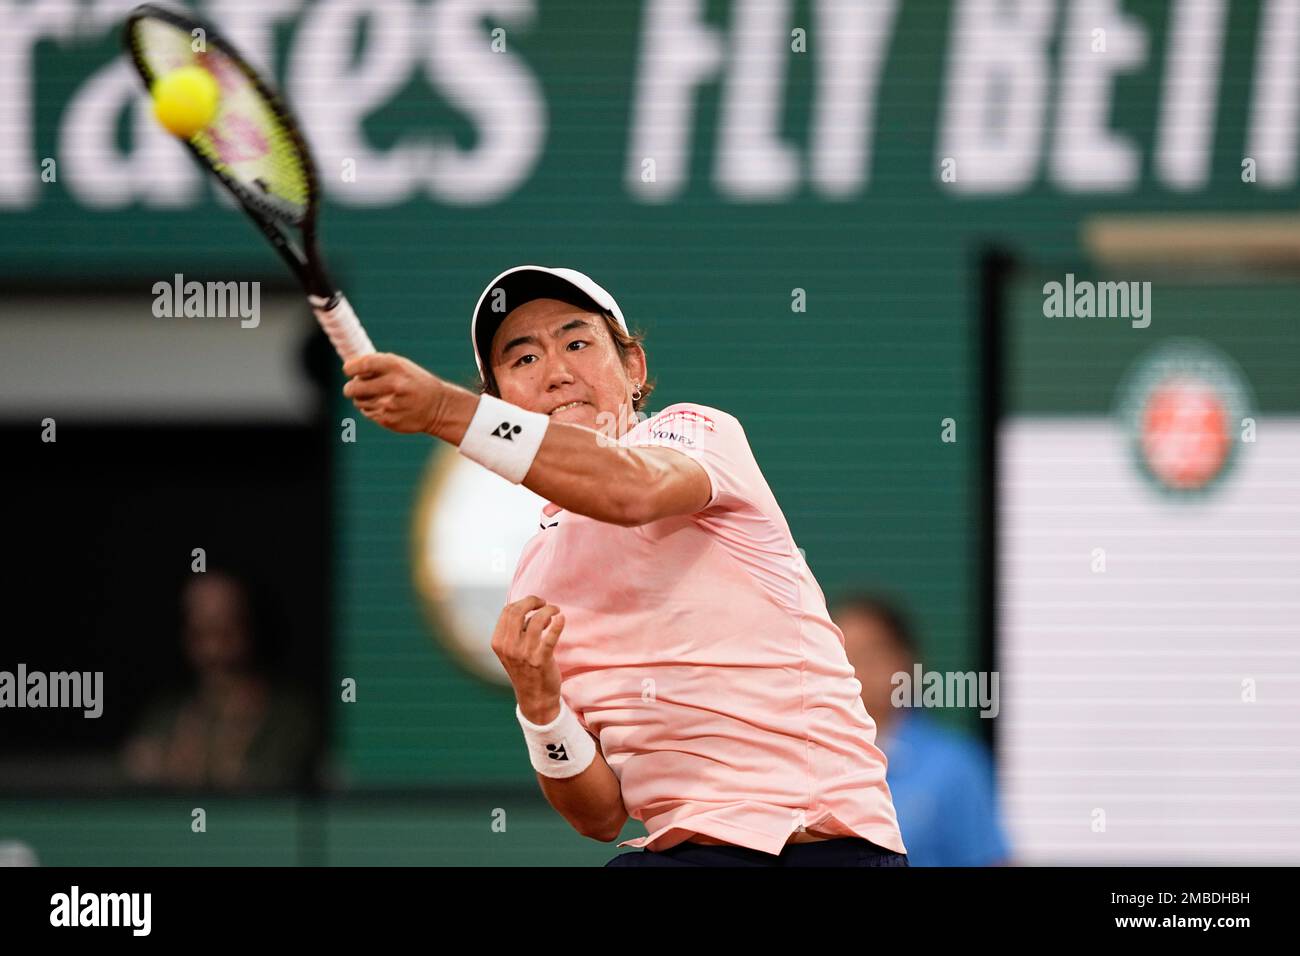 Japans Yoshihito Nishioka plays a shot against Serbias Novak Djokovic during their first round match at the French Open tennis tournament in Roland Garros stadium in Paris, France, Monday, May 23, 2022